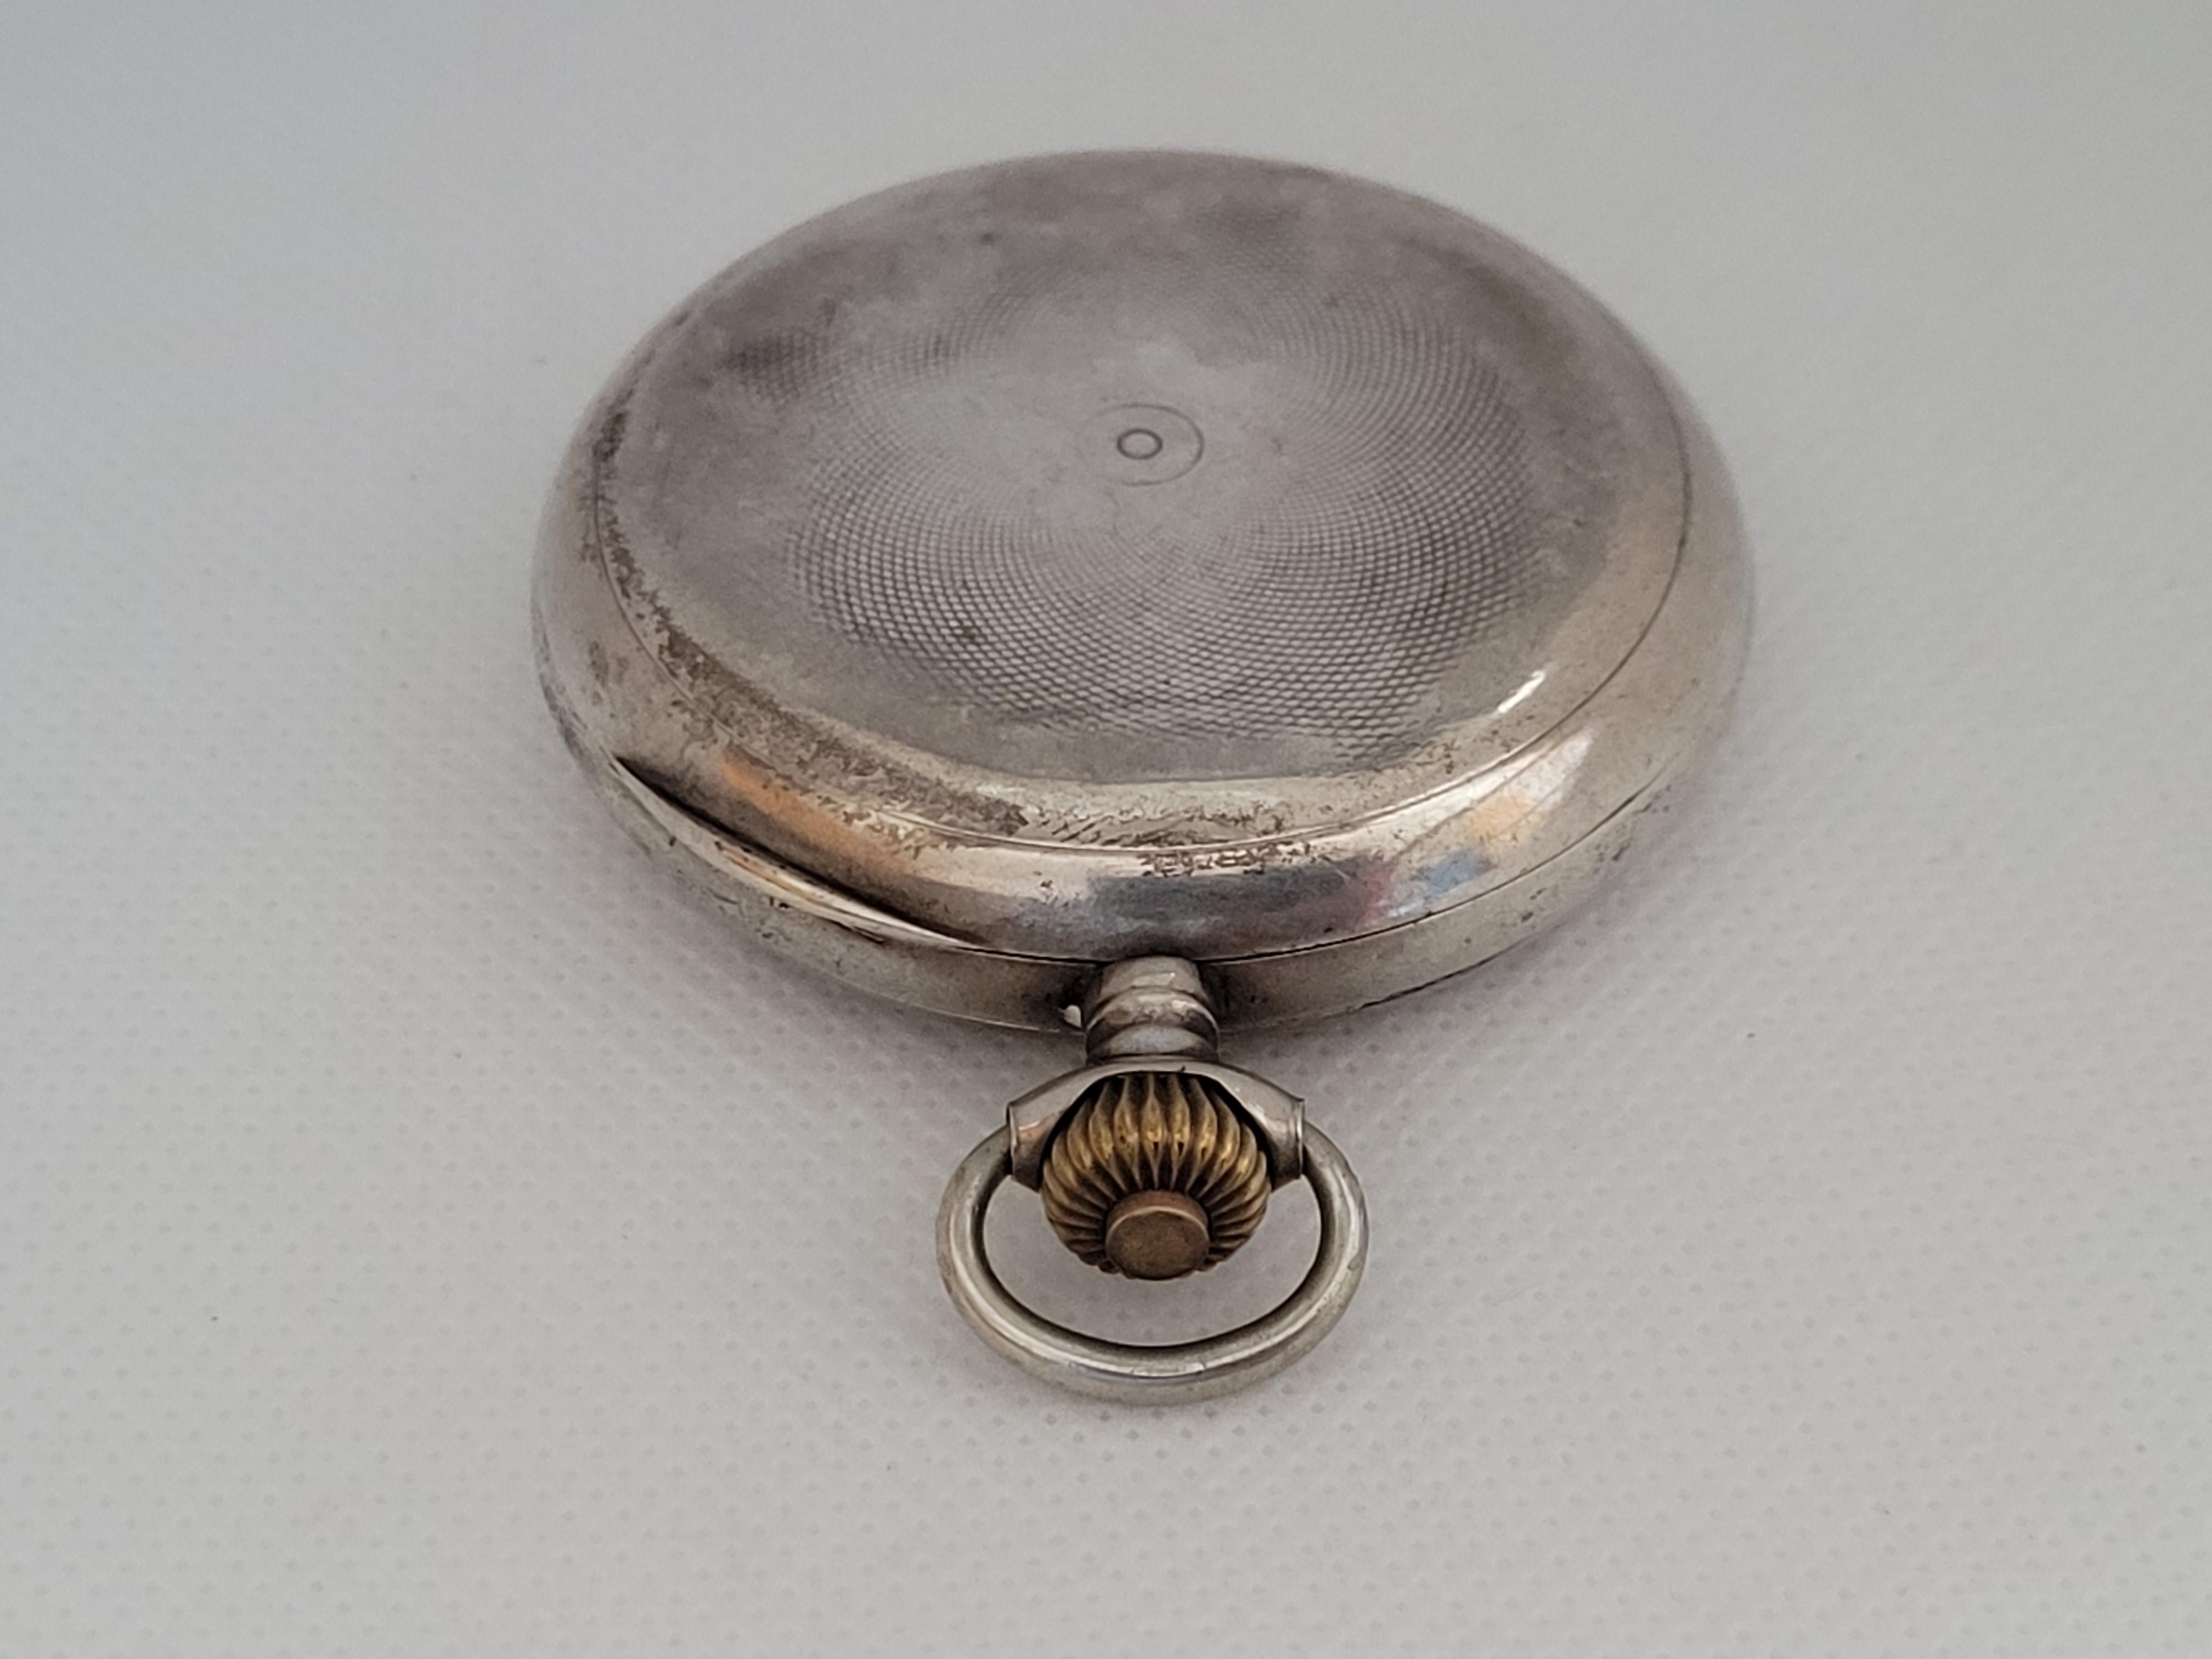 P Moser Pocket Watch Working Case Year 1910 Swiss Made 875 Silver For Sale 2